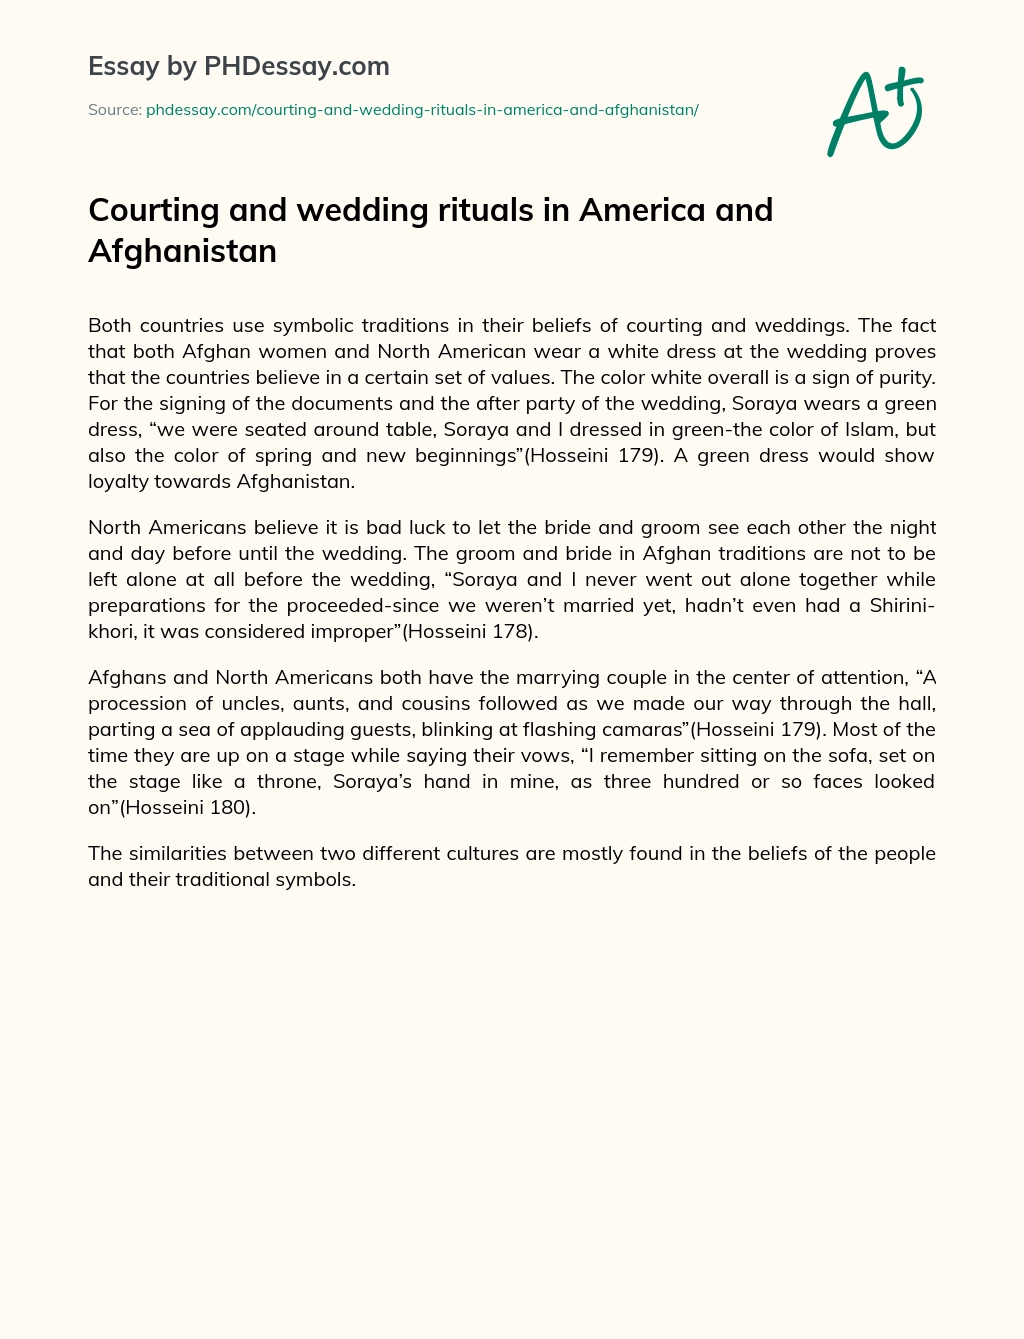 Courting and wedding rituals in America and Afghanistan essay